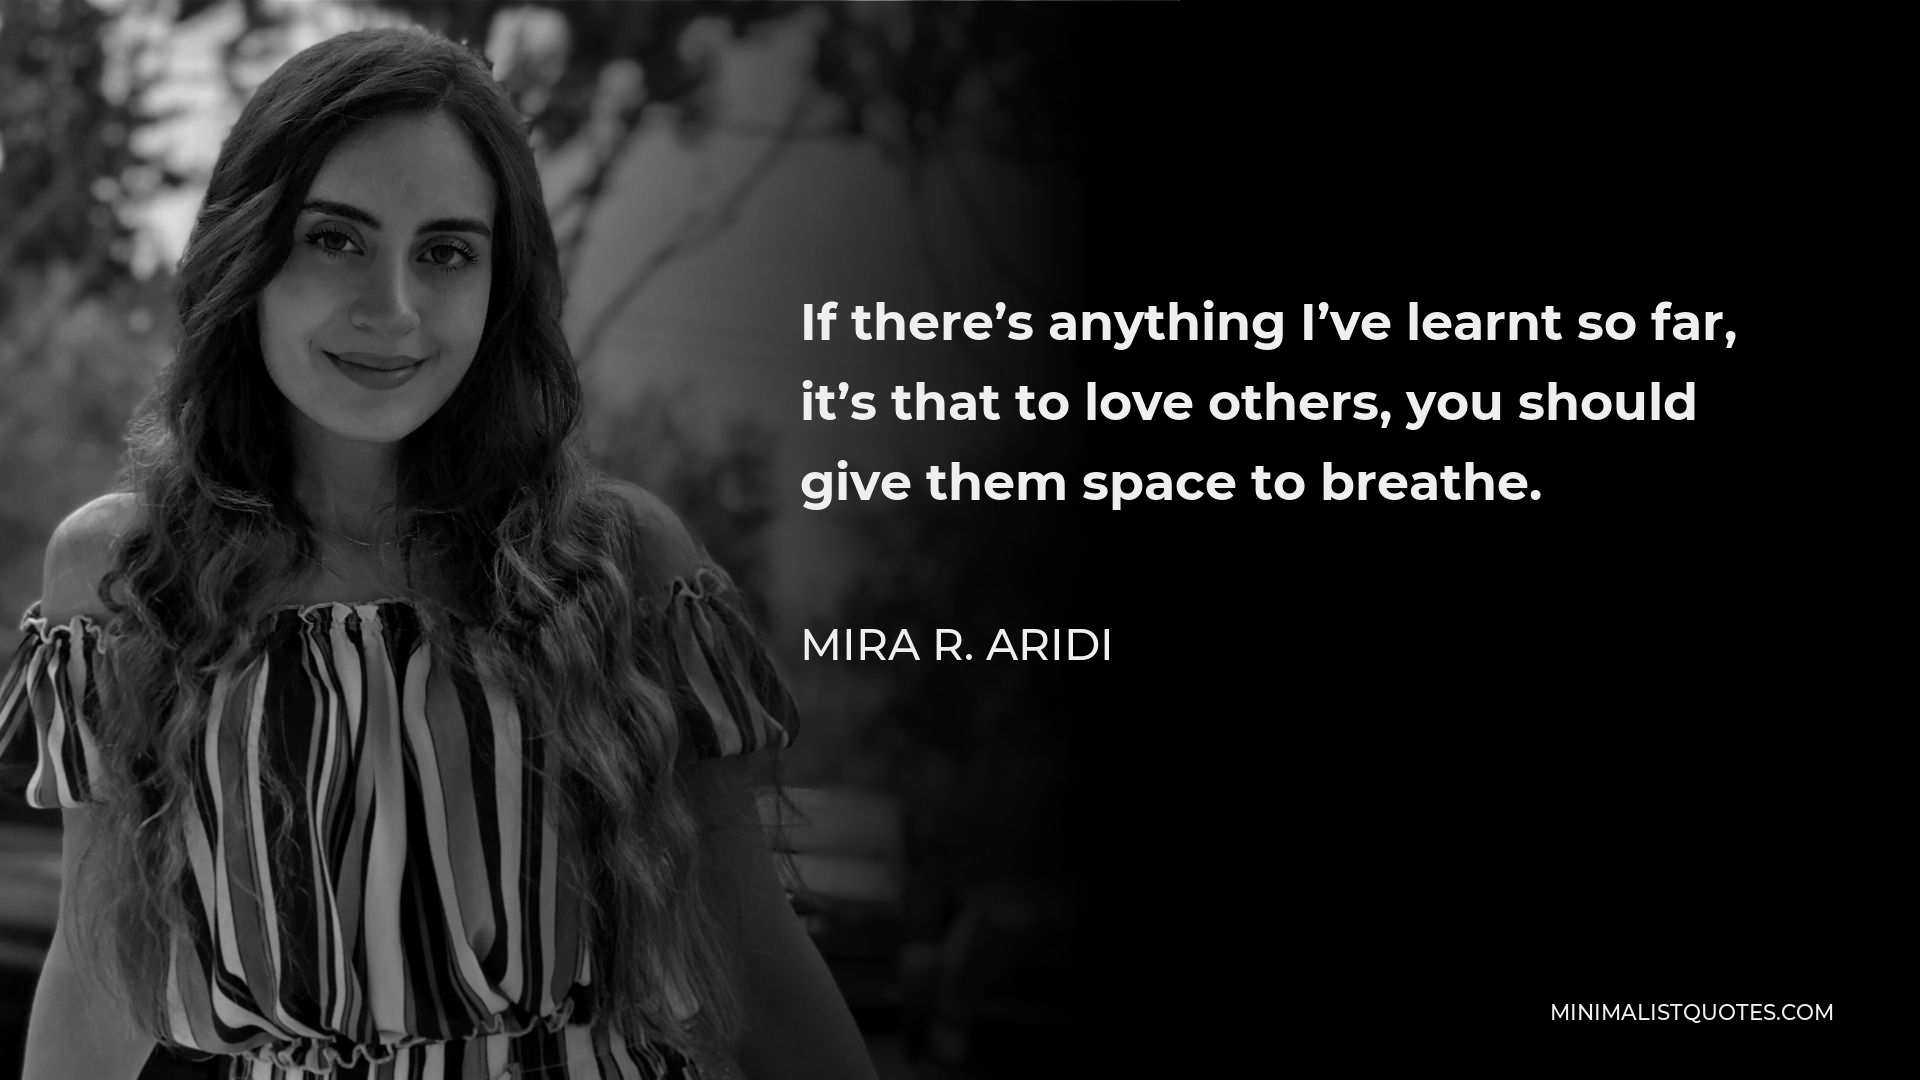 Mira R. Aridi Quote - If there’s anything I’ve learnt so far, it’s that to love others, you should give them space to breathe.